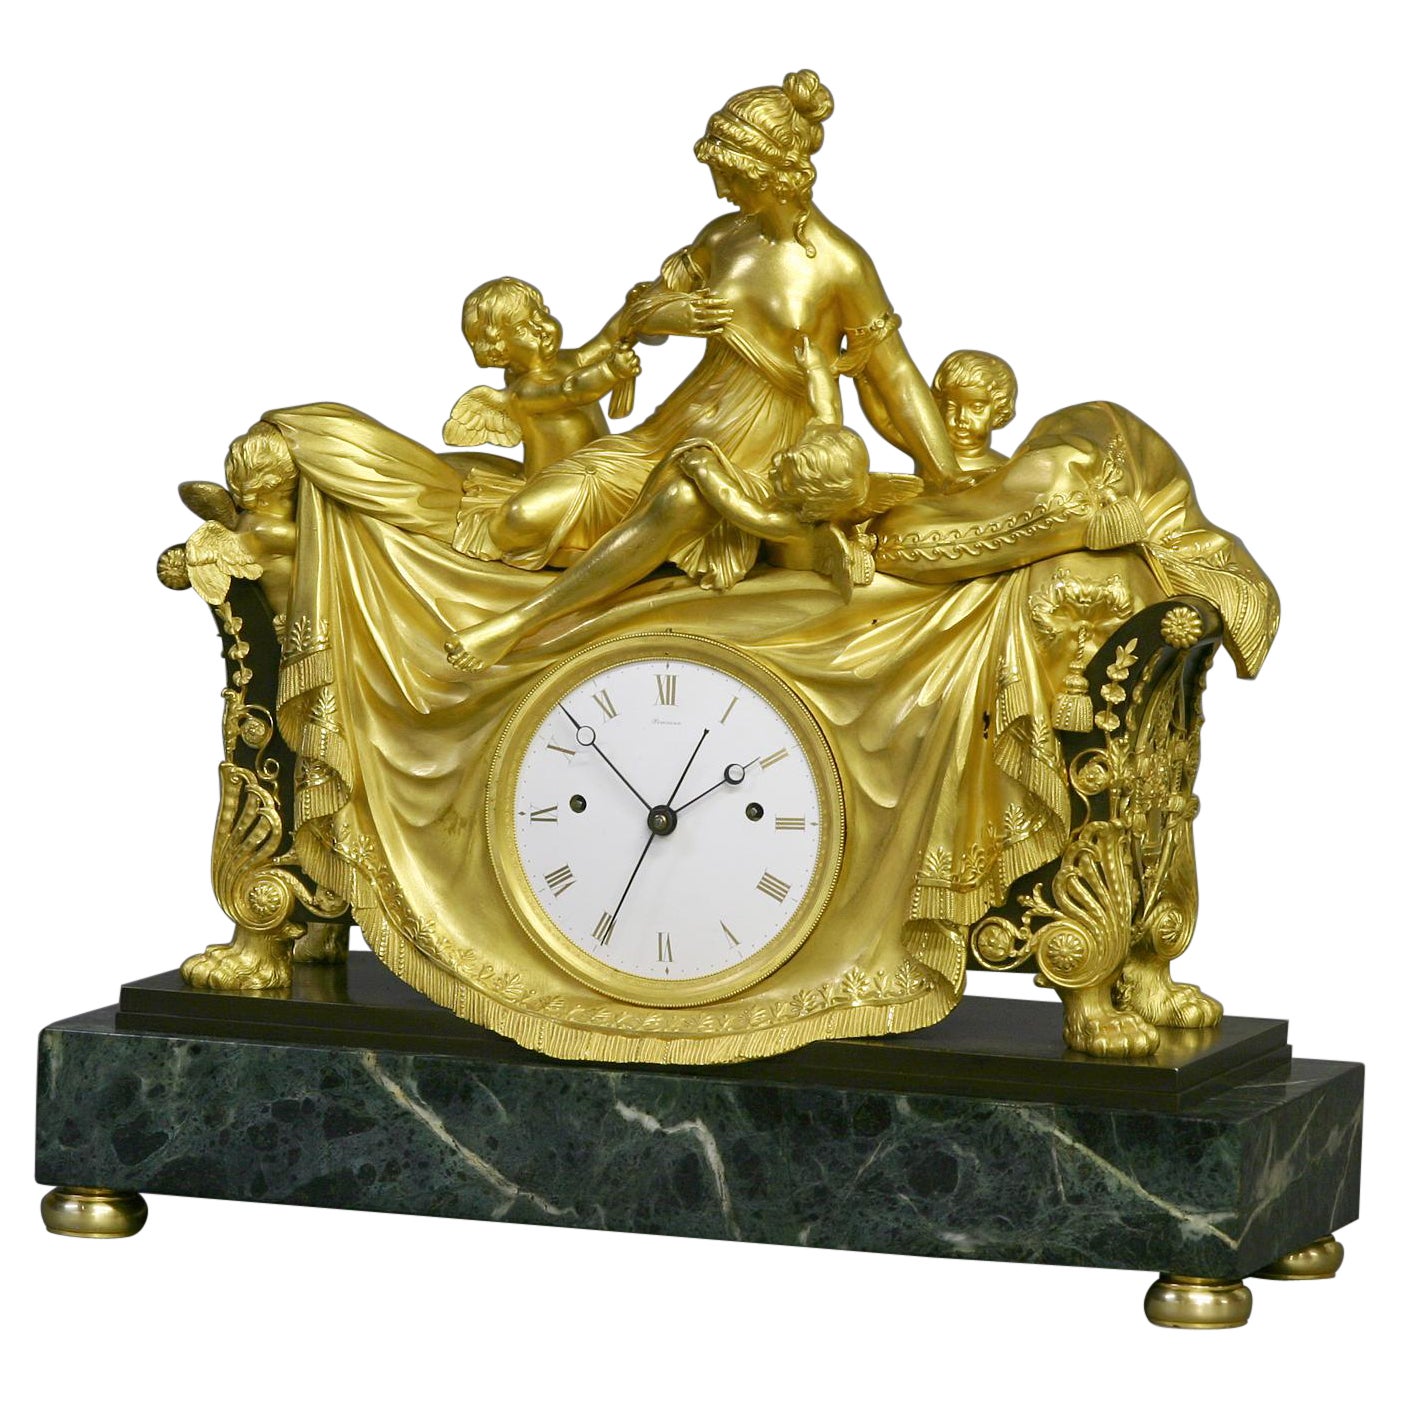 c.1812 English Patinated, Ormolu and Marble Figural Mantle Clock